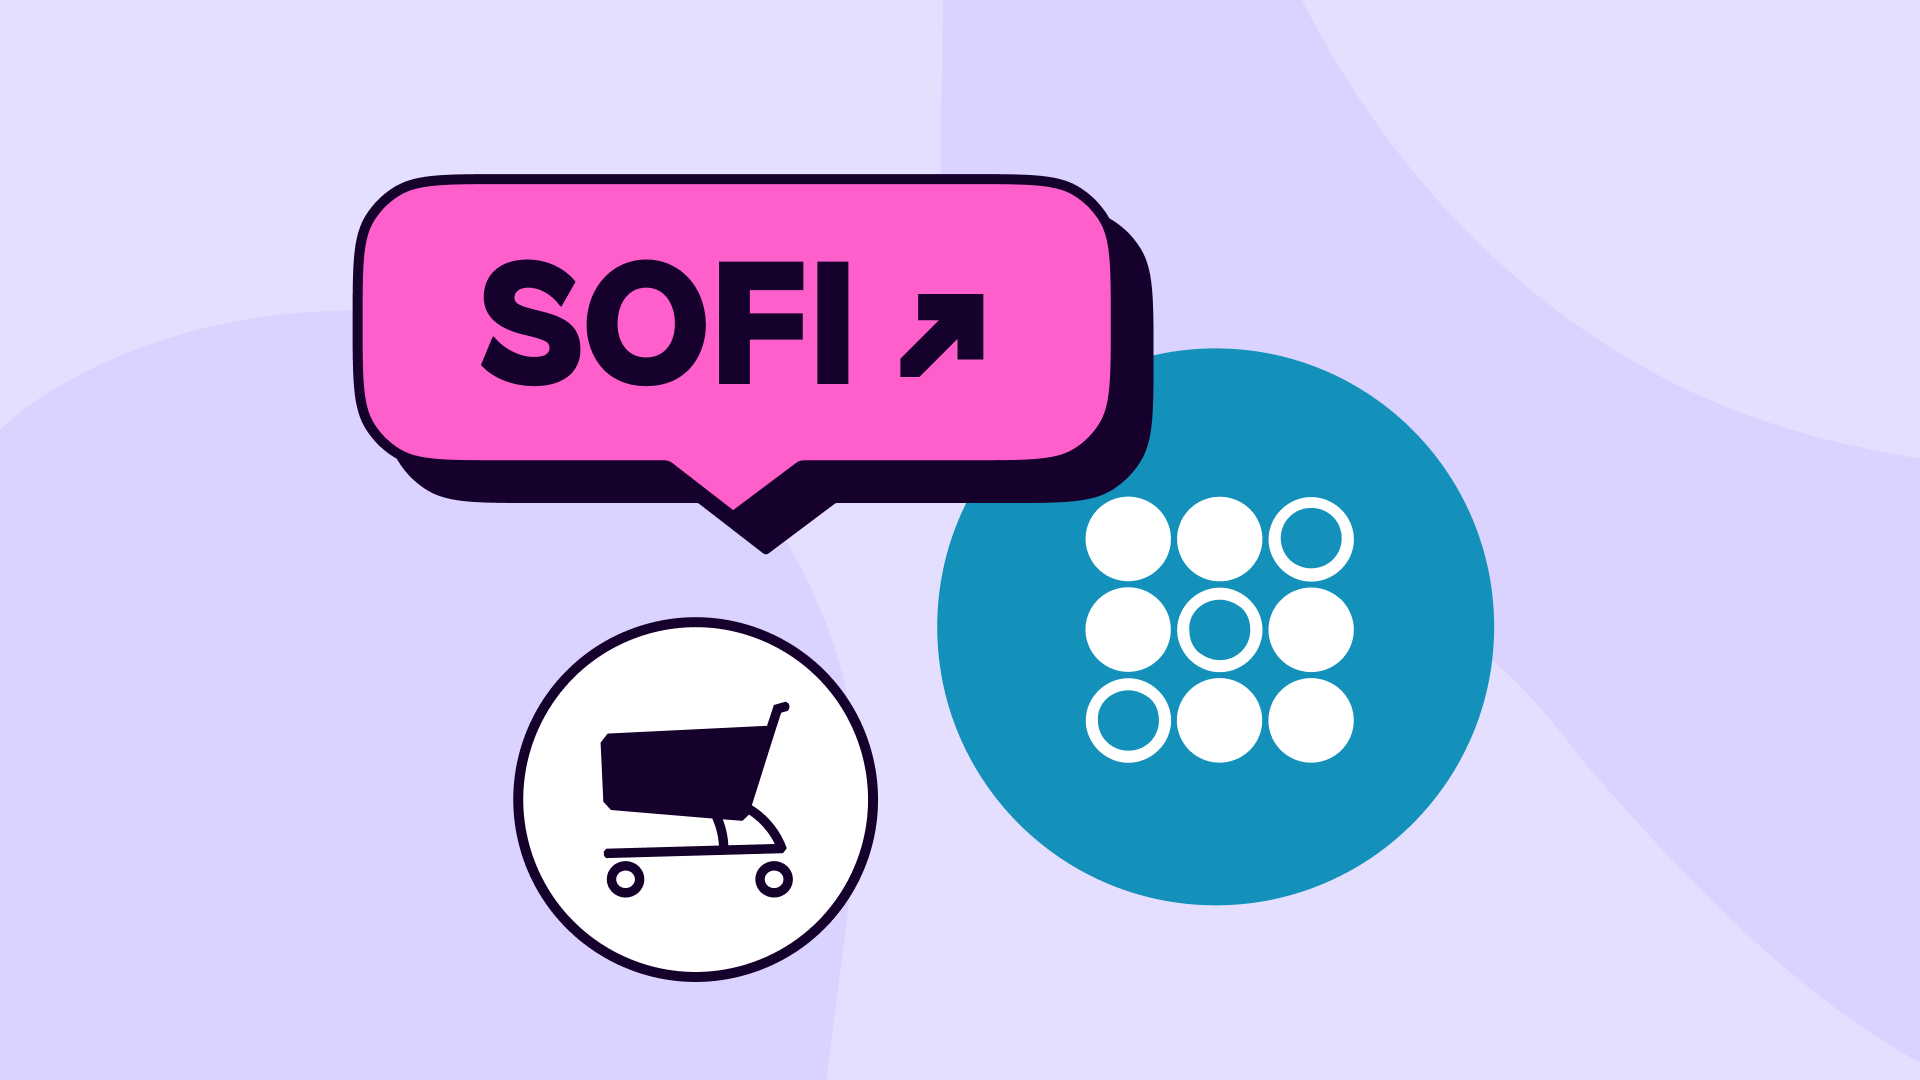 How to buy and sell SoFi shares